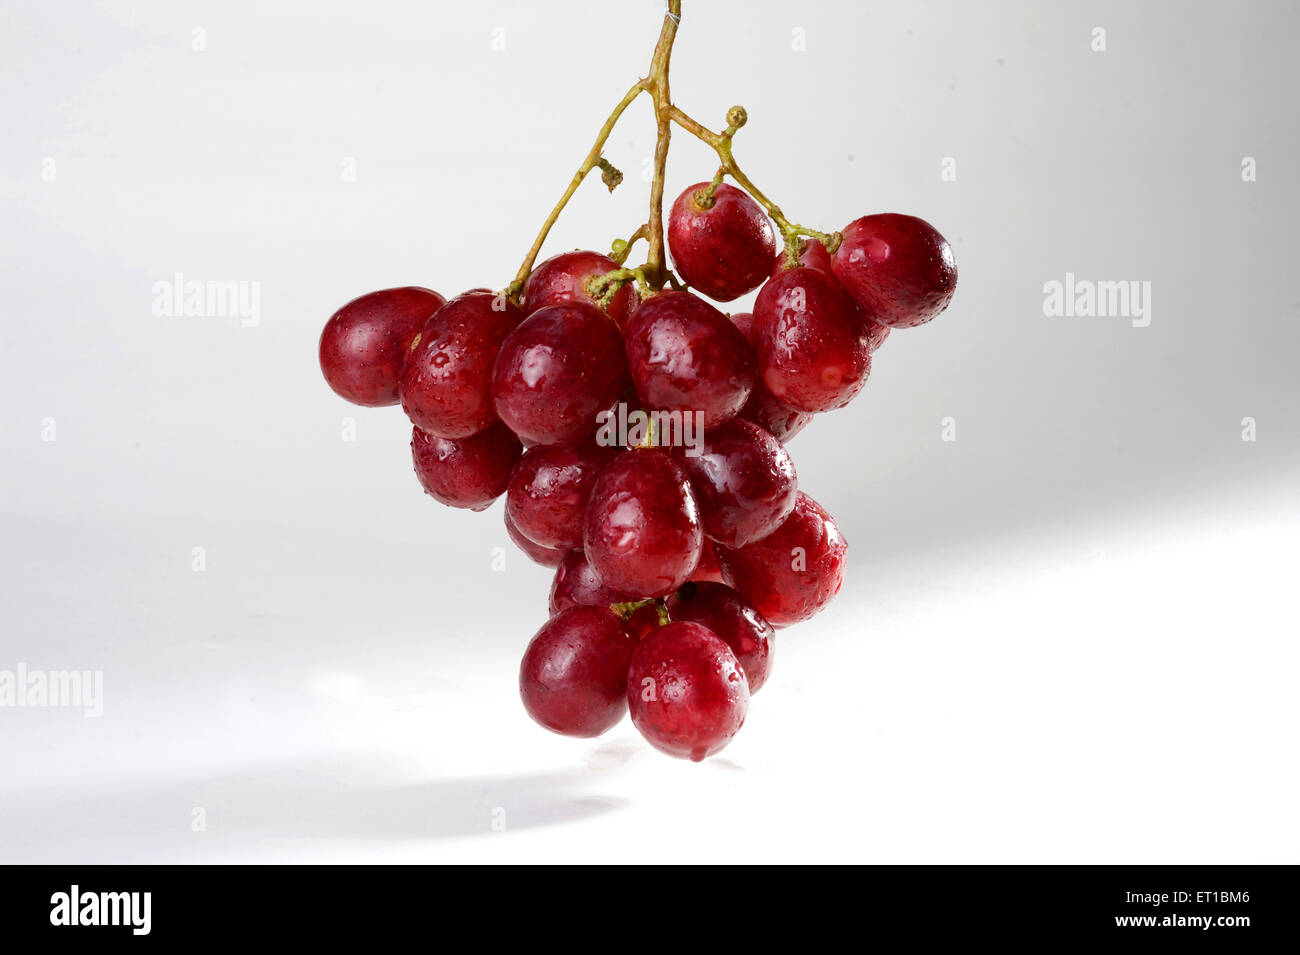 Fruits ; water drops on bunch of red grapes on white background Stock Photo